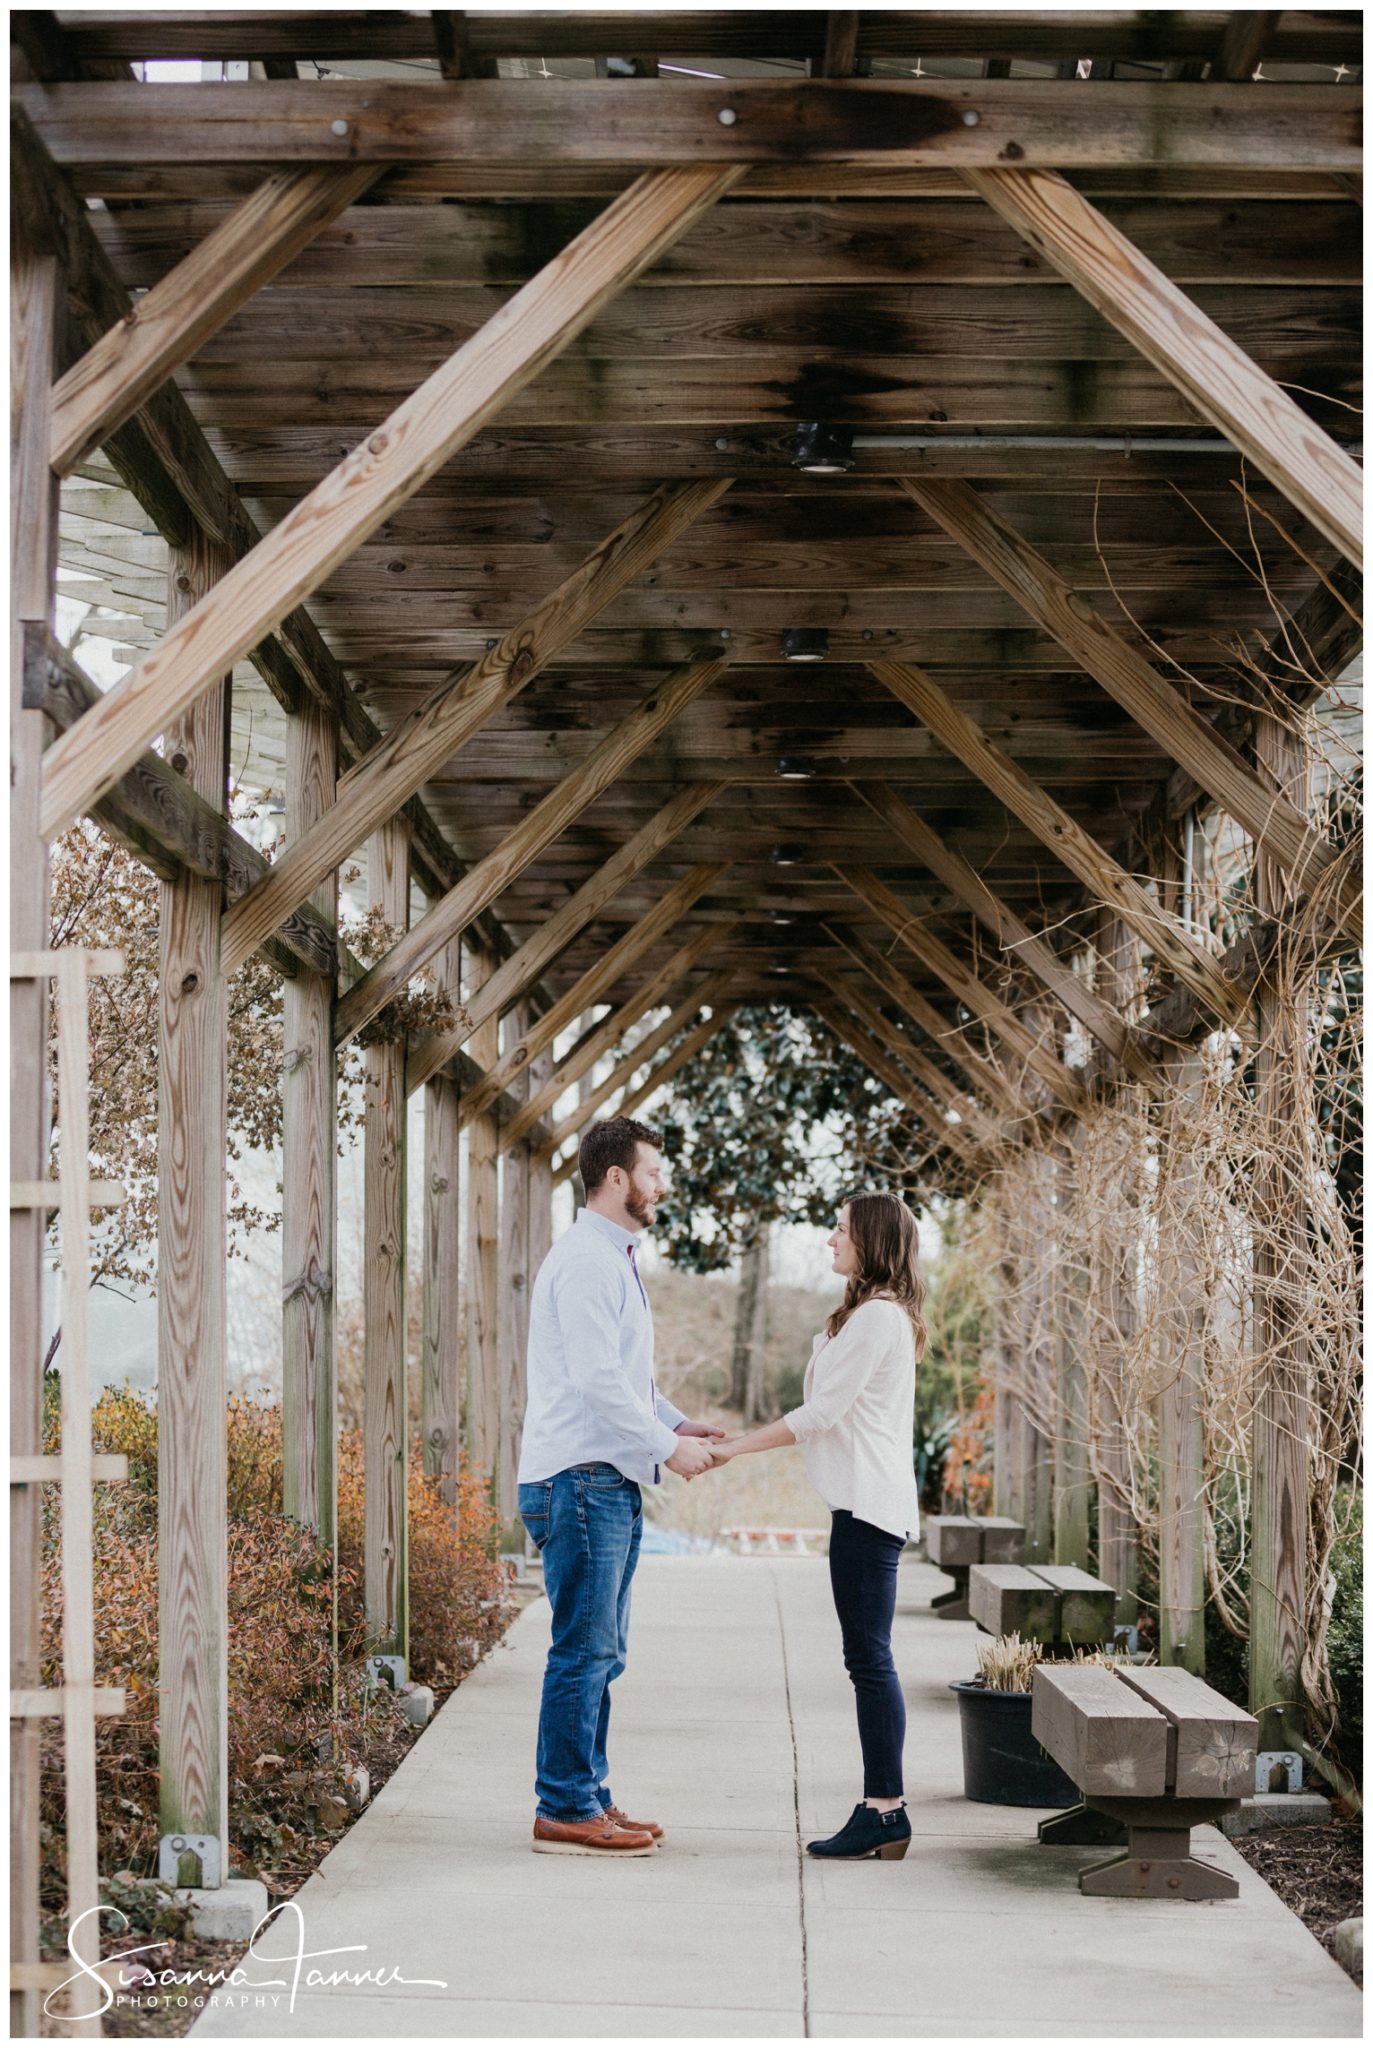 Cincinnati Krohn Conservatory Engagement Photography, couple face each other standing, hold hands and look at each other in outdoor landscaped patio.